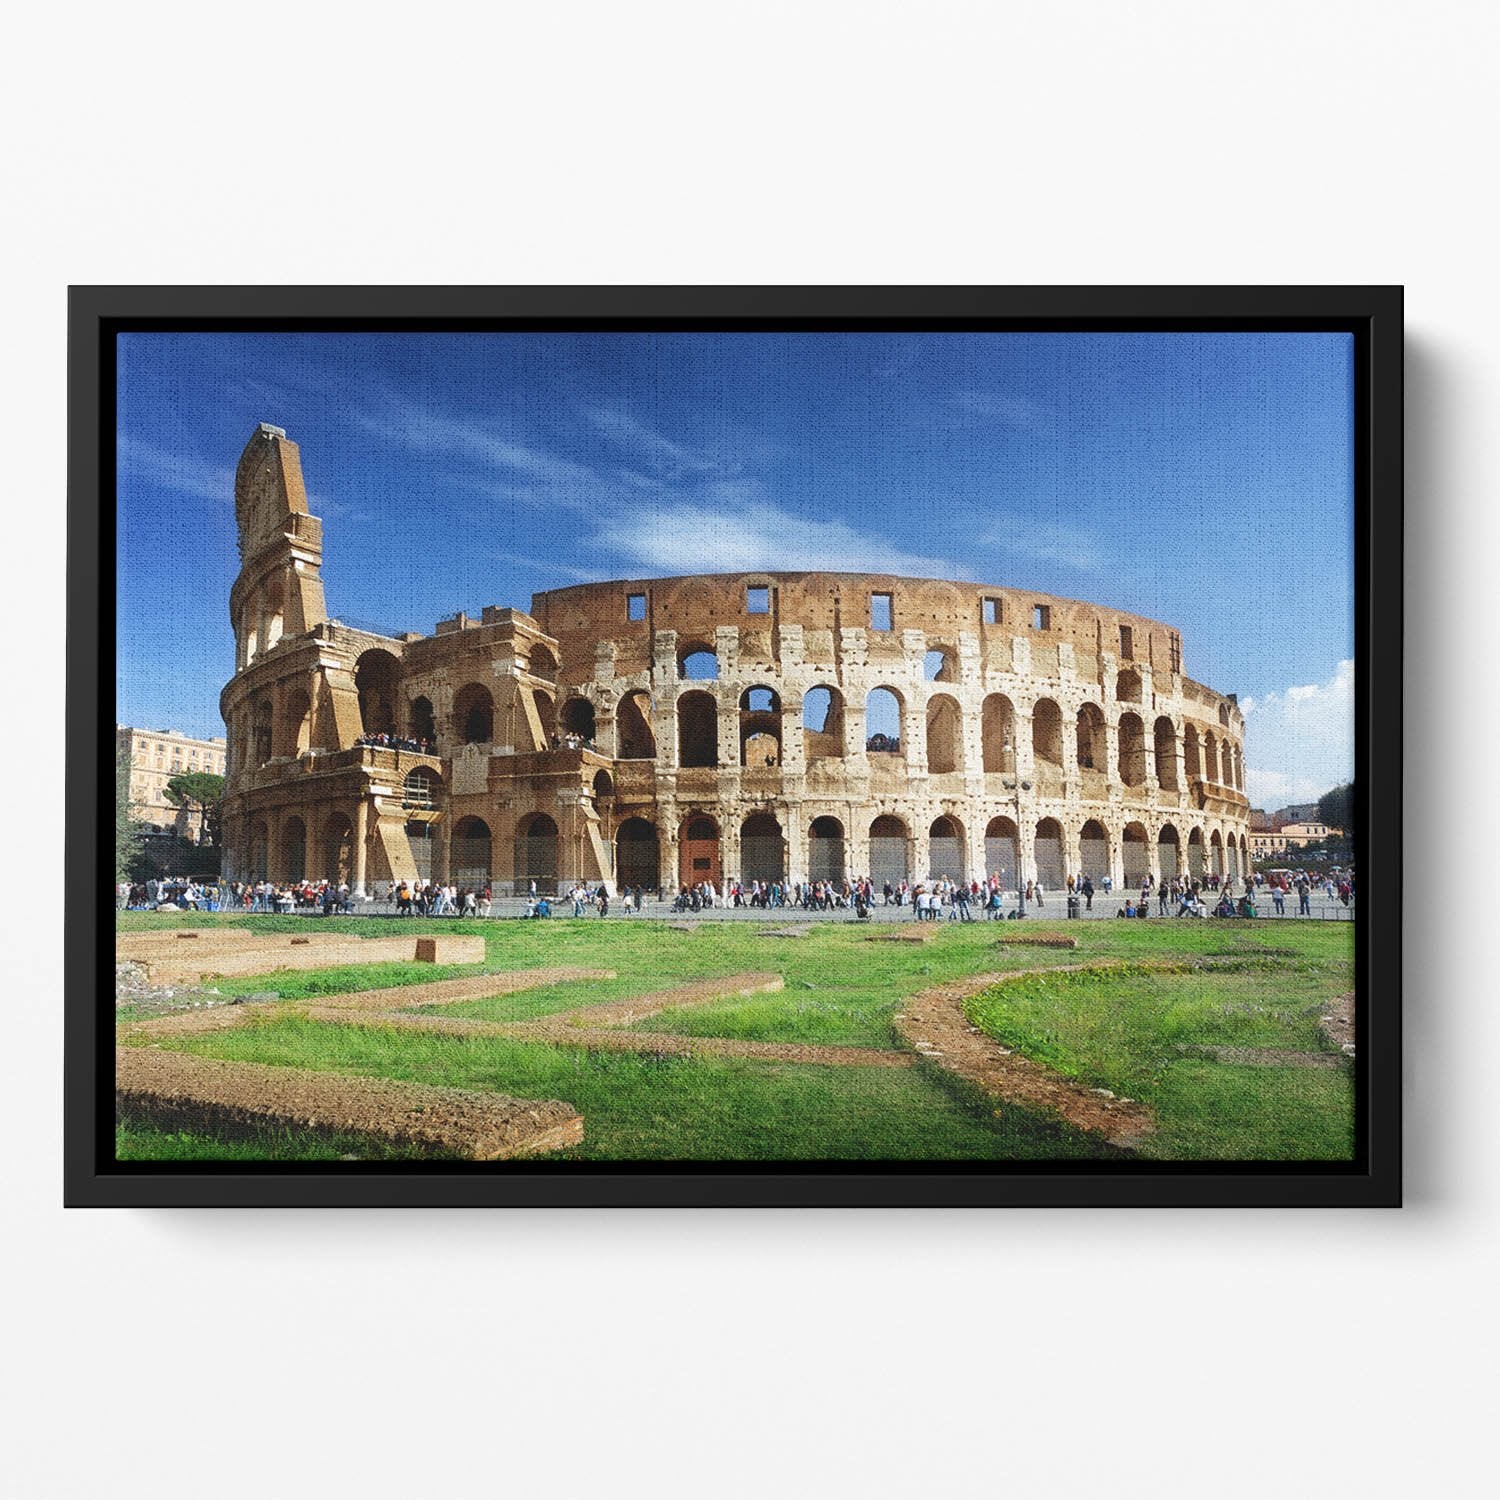 Colosseum in Rome Italy Floating Framed Canvas